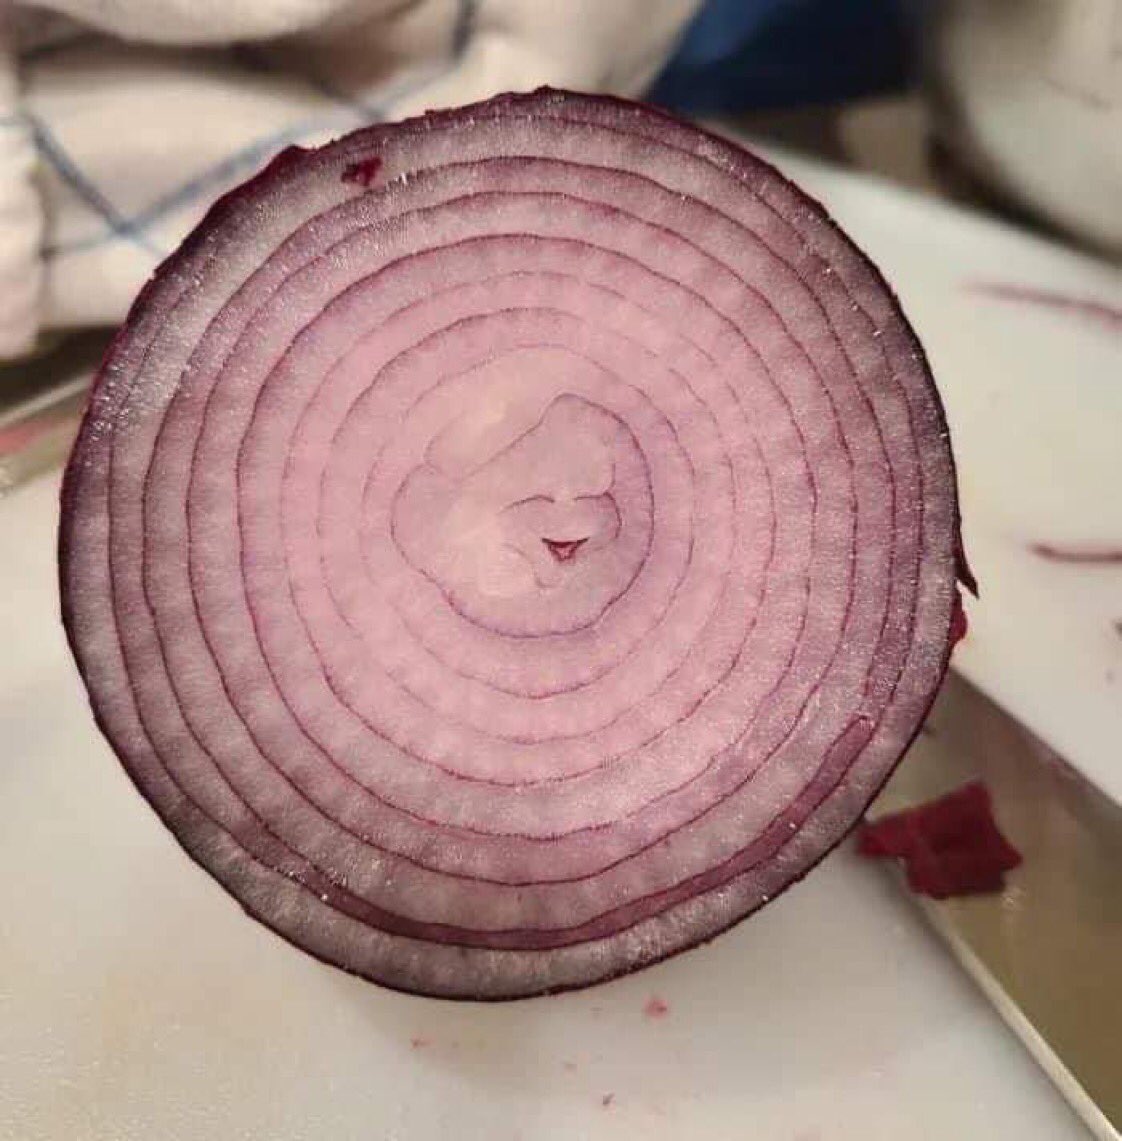 don't ignore the happy little onion and you will have the best week ever